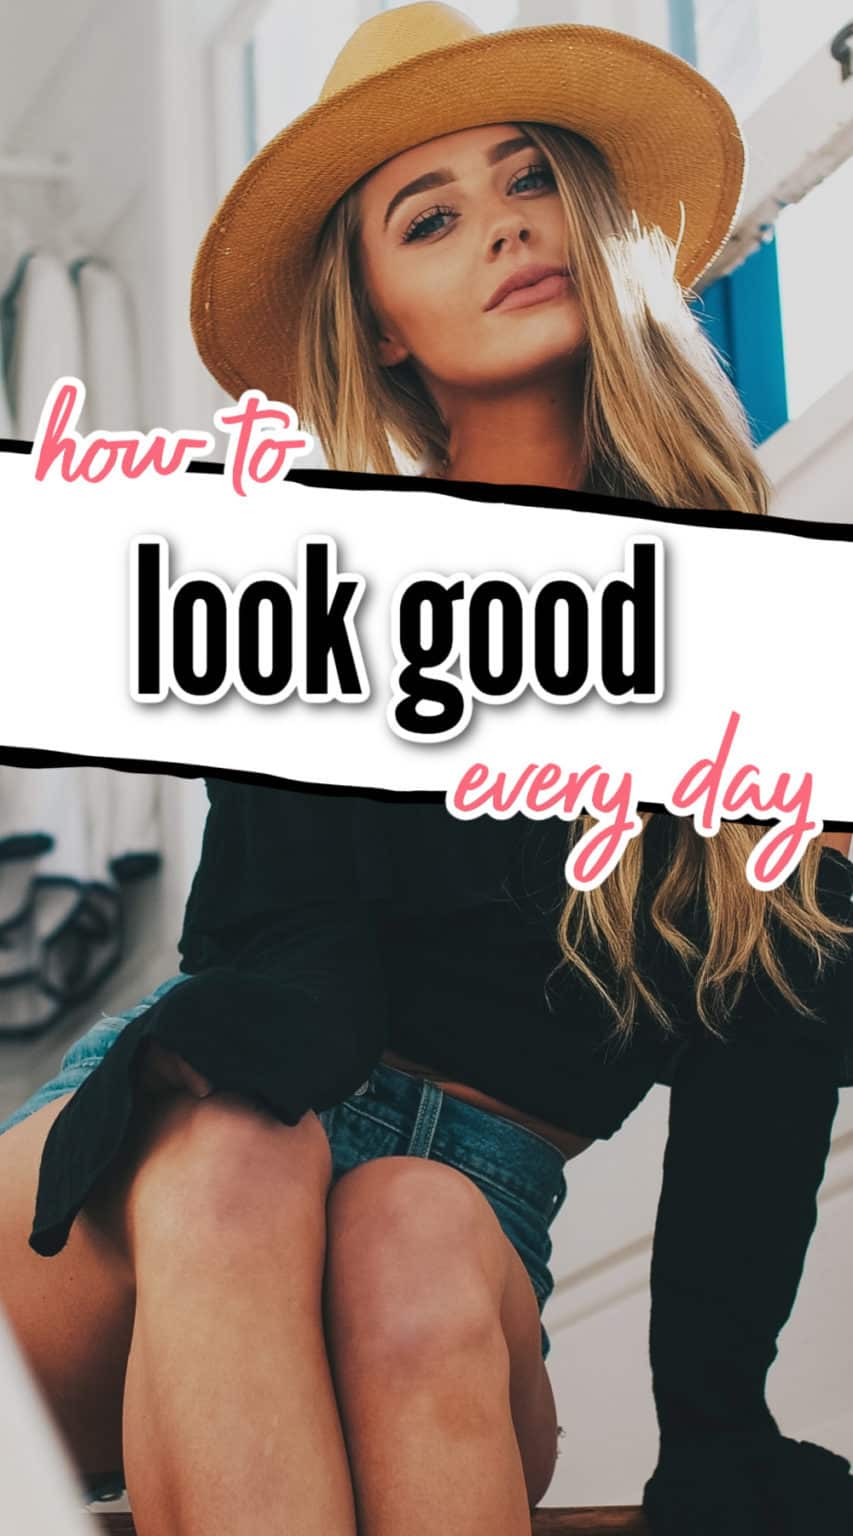 How To Look Good With Minimal Effort - I Heart The New Me